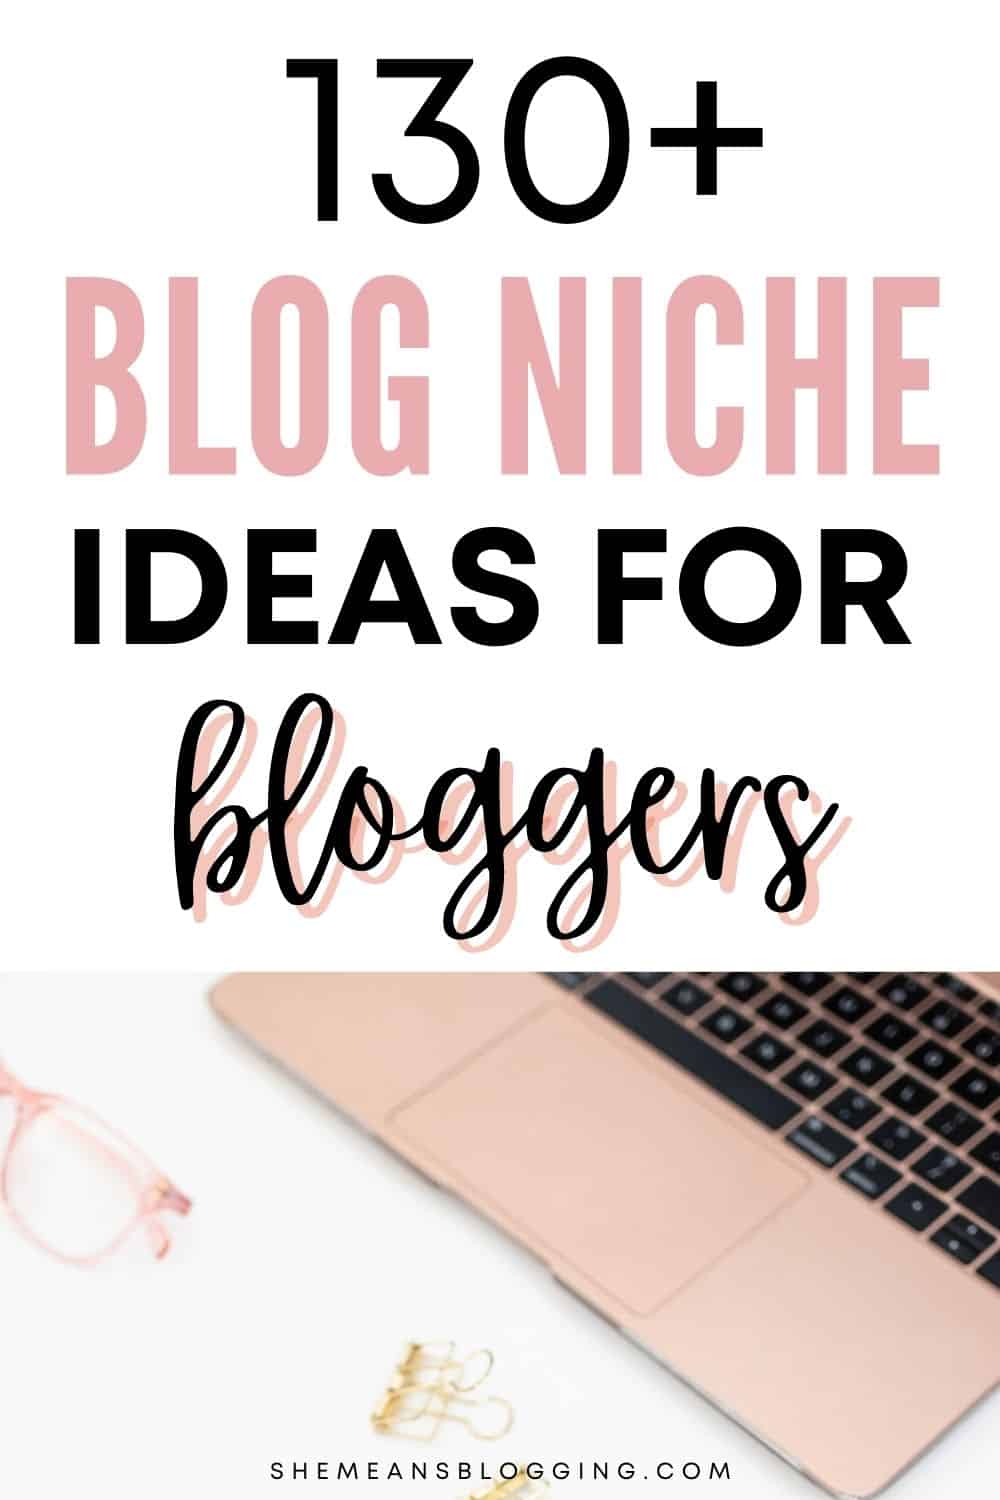 What are best blog niche ideas to choose from? Are you still looking for some high demand blogging ideas? Here are 130+ niche ideas to get inspiration with! These are profitable small niche ideas to create a new blog this year. #nicheideas #bestniche 